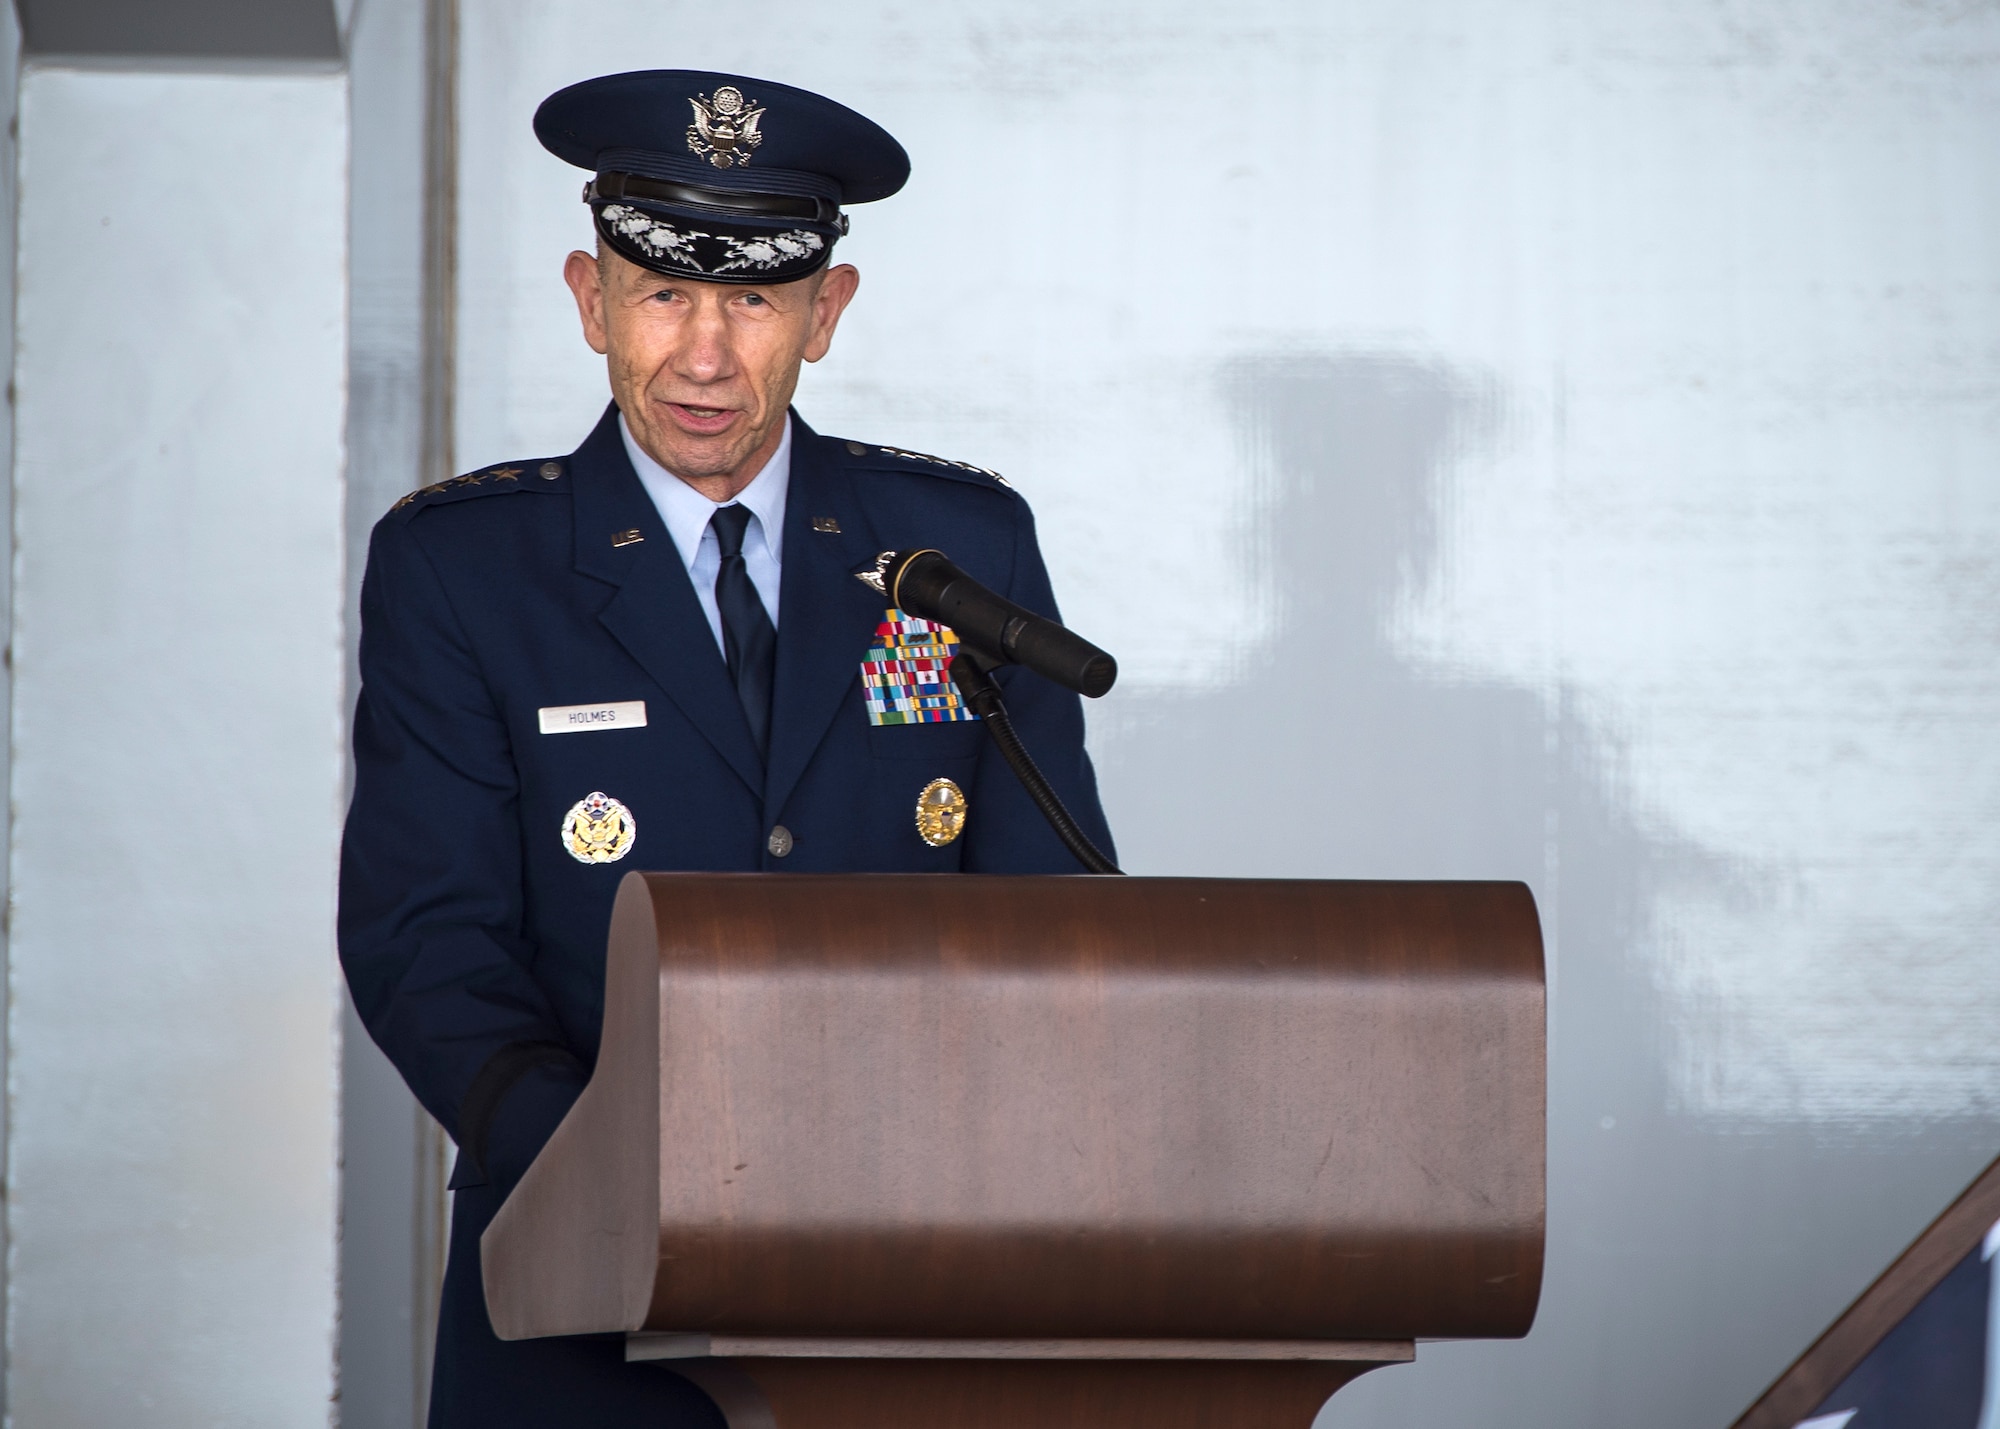 Gen. Mike Holmes, commander of Air Combat Command speaks at the Celebration of Life ceremony honoring the late W. Parker Greene, March 14, 2019, at Moody Air Force Base, Ga. The event was held in honor of Mr.Greene and his unwavering support to Moody, the local community and the entire Air Force for more than 40 years. Mr. Greene, a steadfast Air Force advocate and one of the most influential military civic leaders, passed away Dec. 18, 2018.  (U.S. Air Force photo by Airman 1st Class Eugene Oliver)